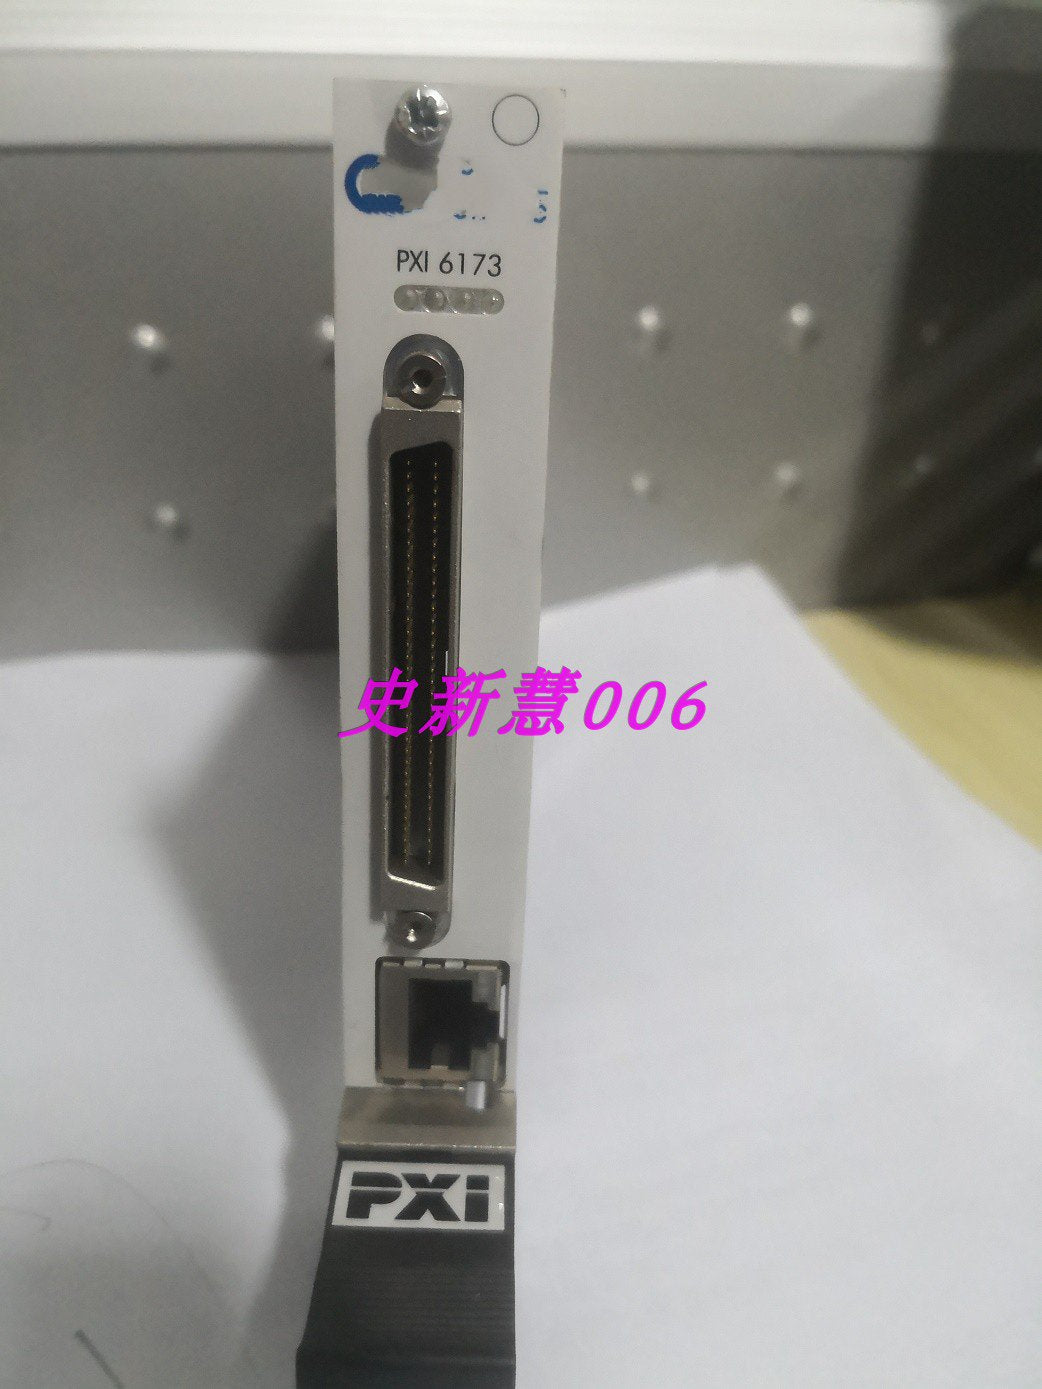 1PC for  used  PXI 6173 / PXI-6173  #OYF008